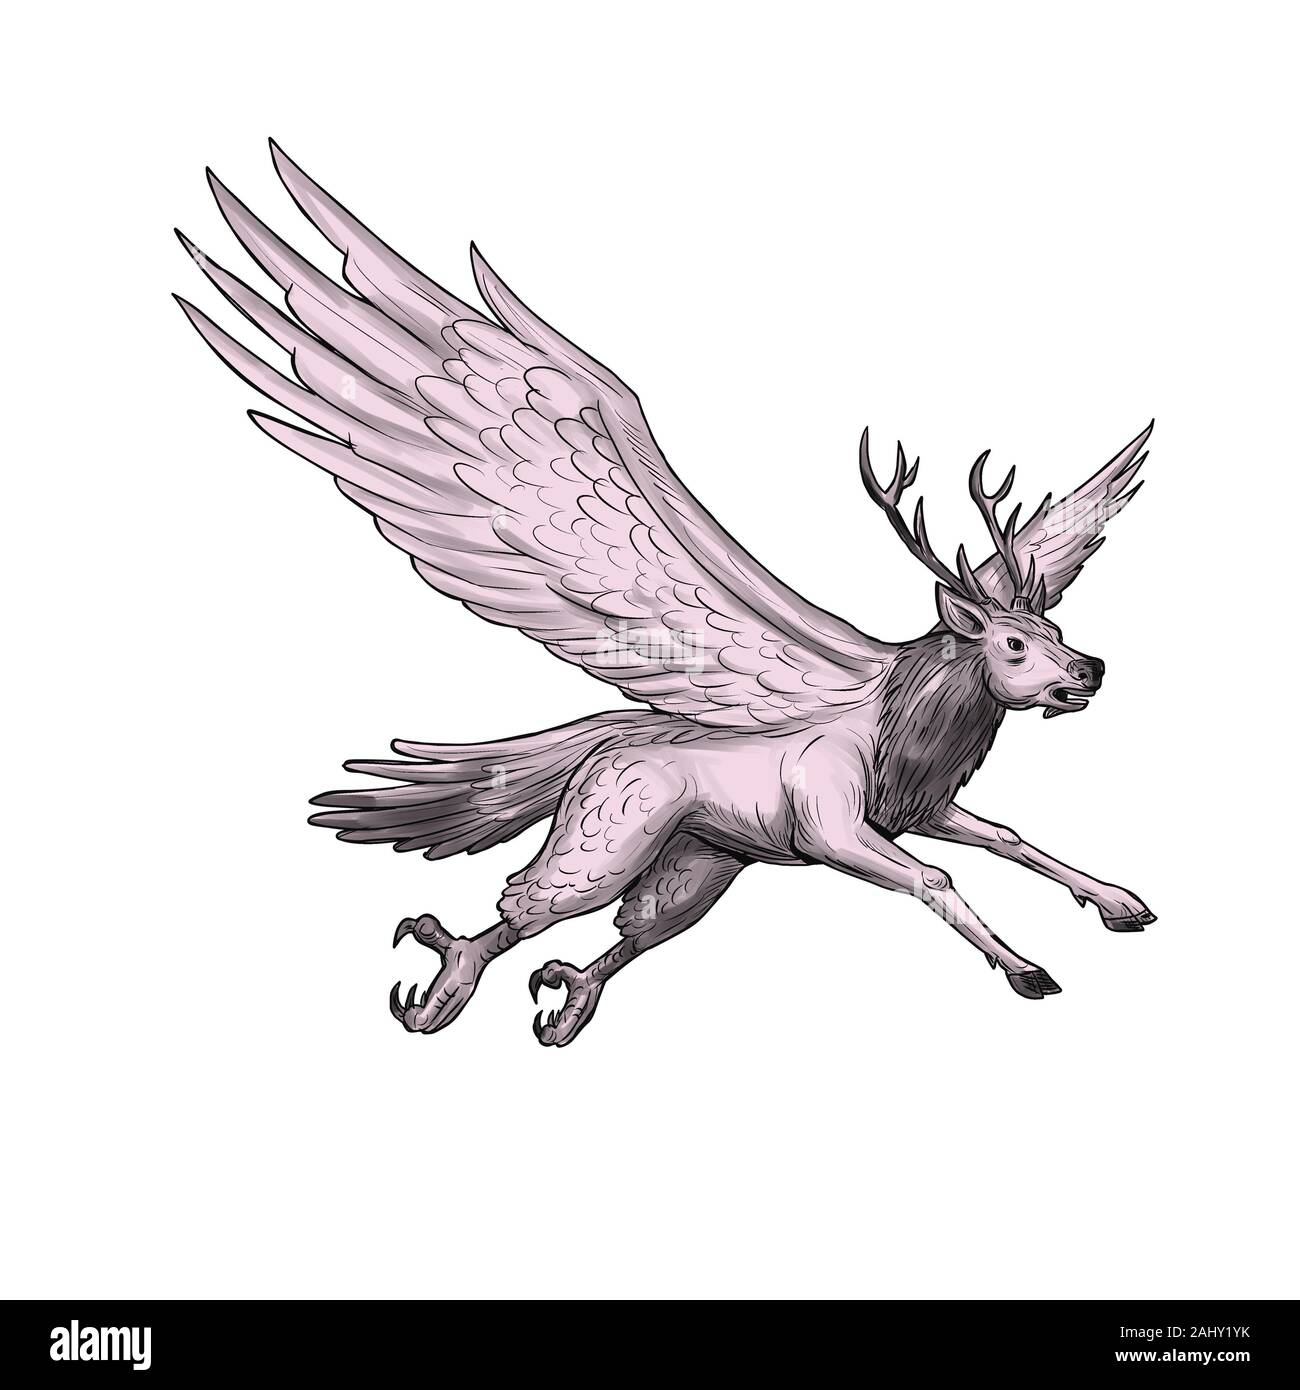 Tattoo style illustration of a Peryton, a Medieval European mythical creature with head, forelegs and antlers of a full-grown stag with the wings Stock Photo